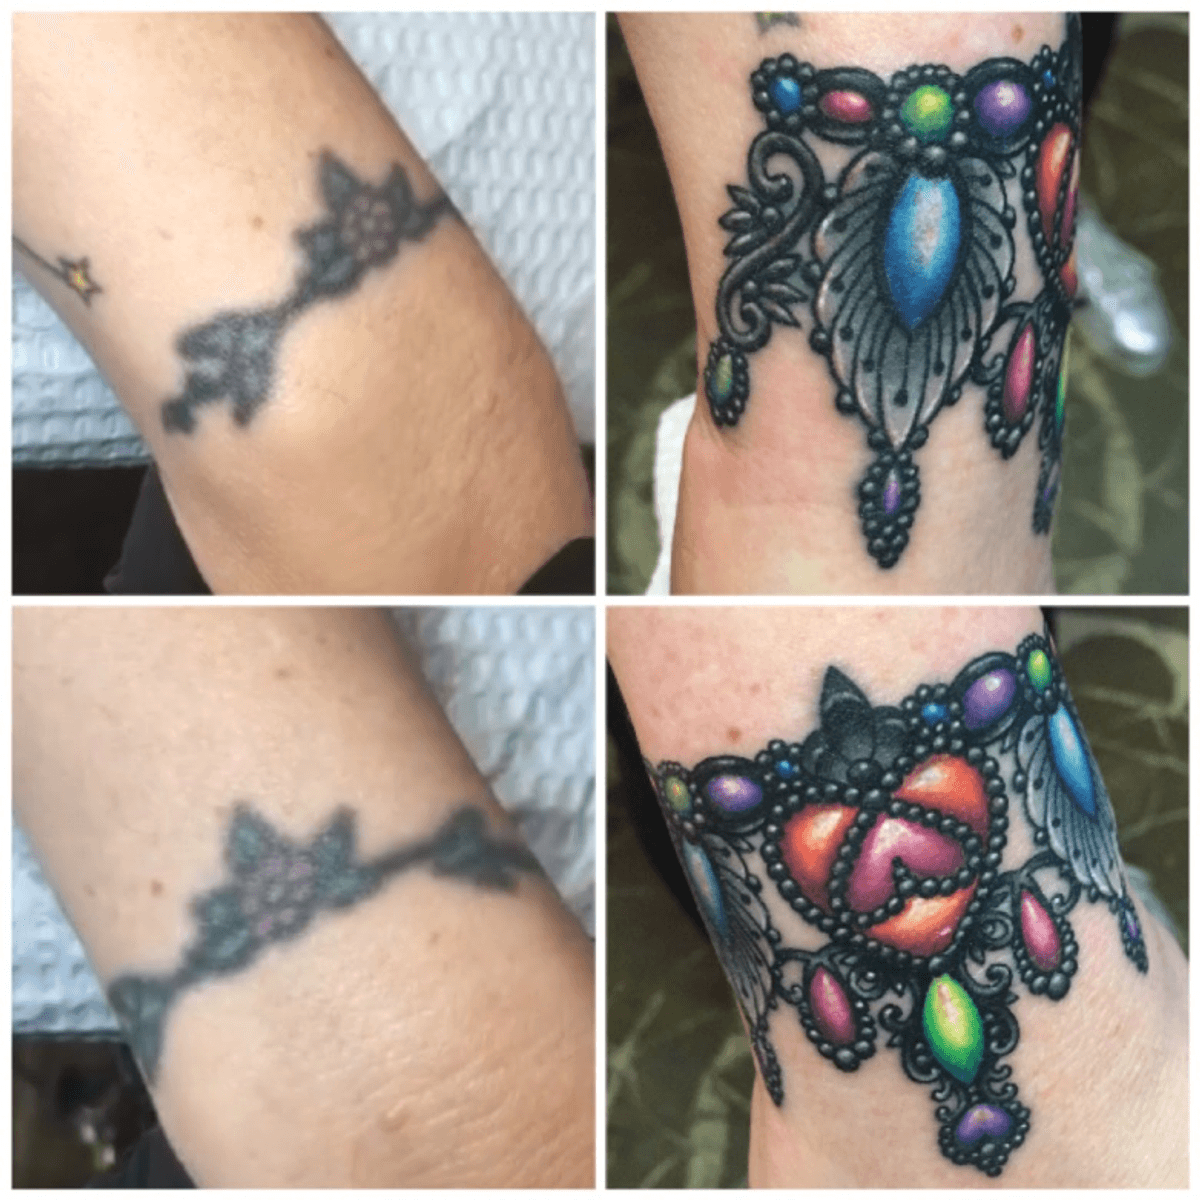 Tattoo uploaded by Megan Massacre • Before and after of a wrist cover-up  jewelry tattoo i made a few weeks ago at Grit N Glory! For tattoo  appointments email tattoo@ ✨ #coverup #